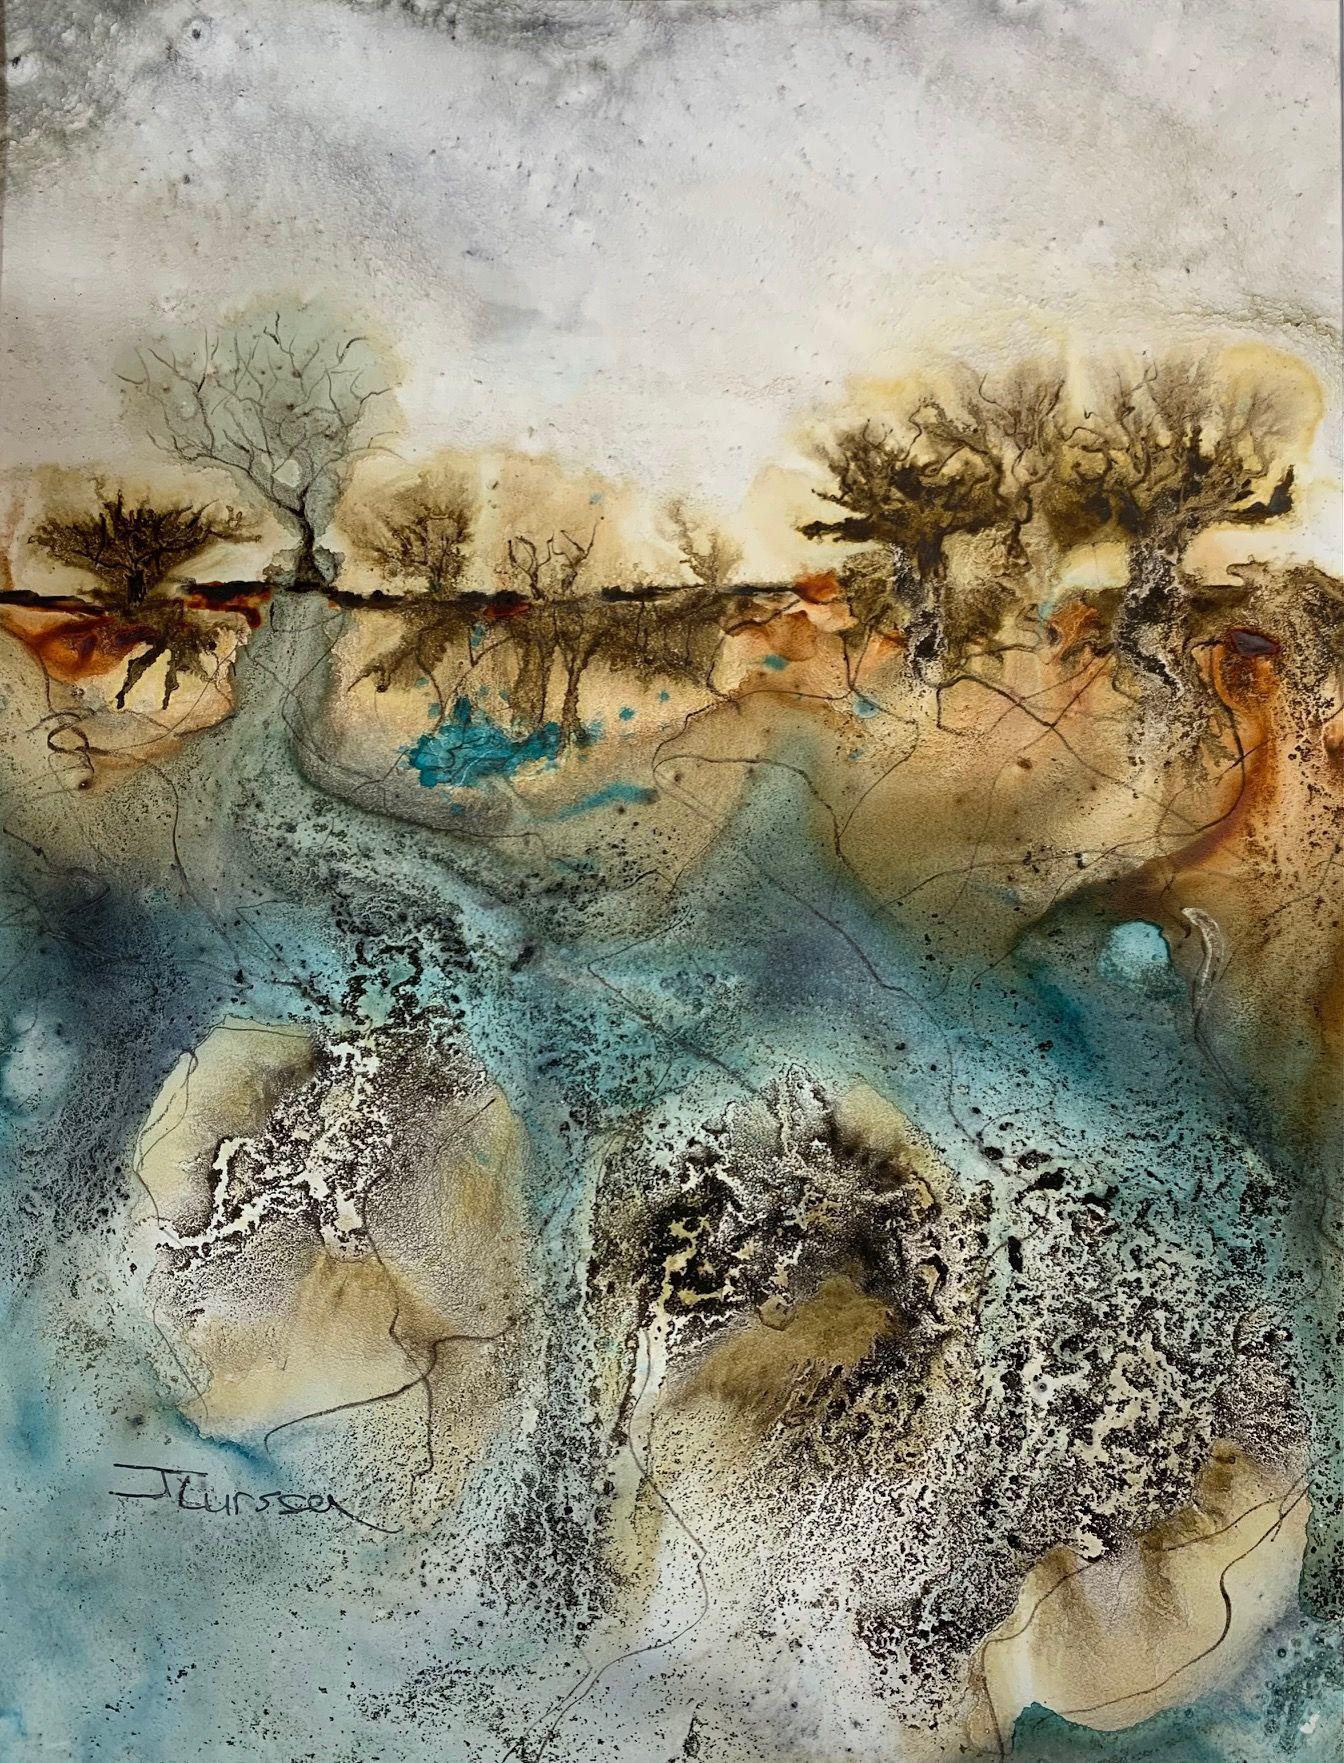 Jean Lurssen Abstract Drawing - Imagined Landscape, Painting, Watercolor on Other